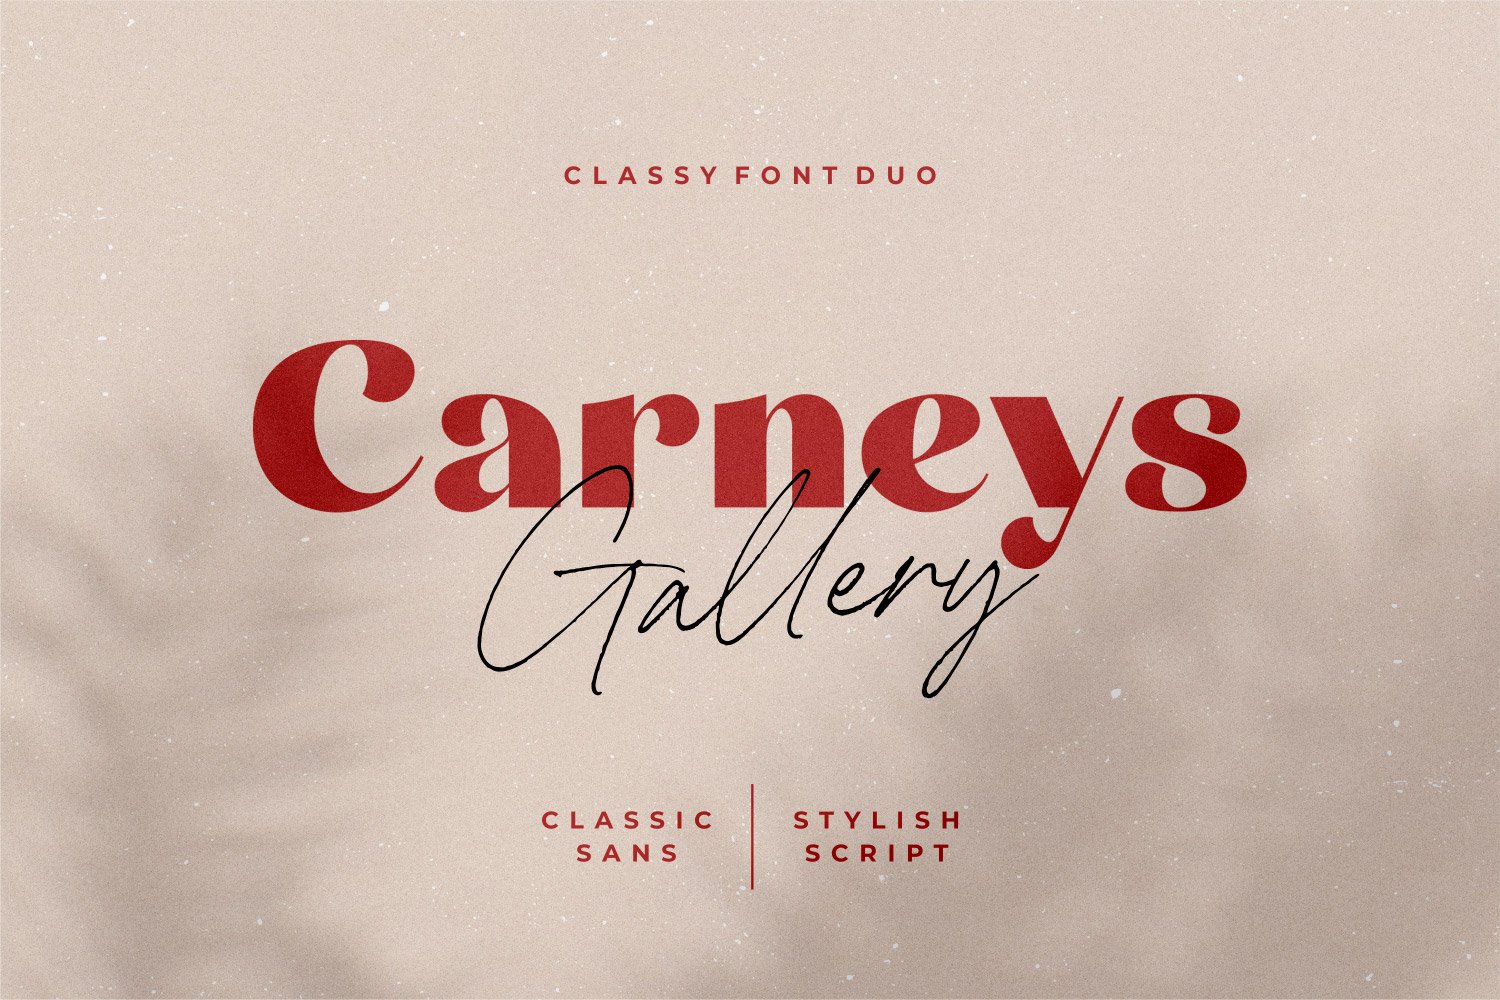 Carneys Gallery Font Duo